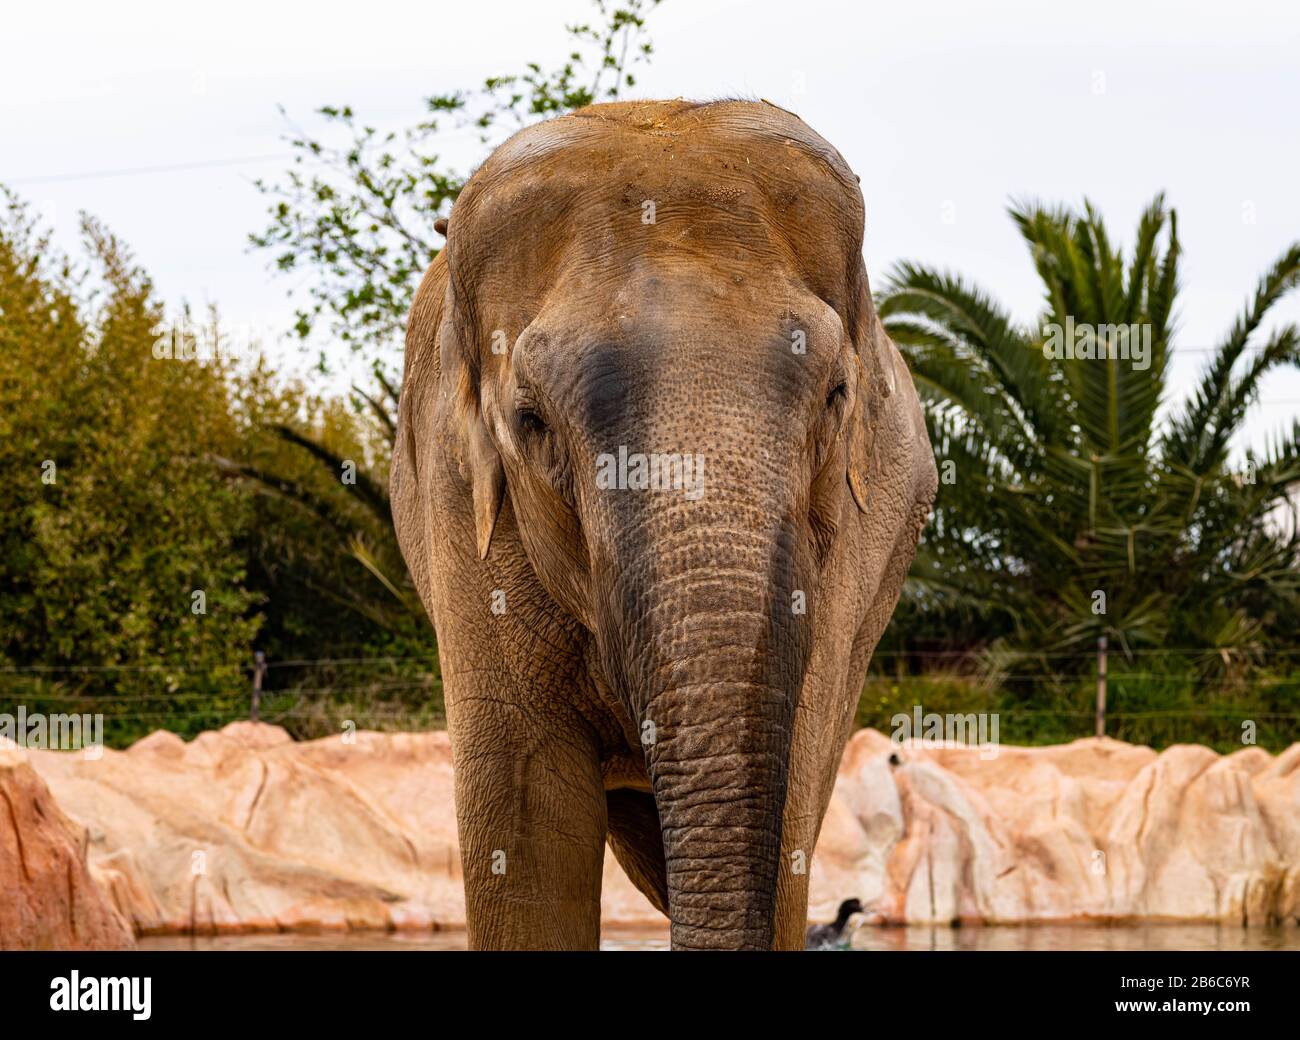 An Elephant Looks At The Camera Head On With Its Trunk Down Stock Photo